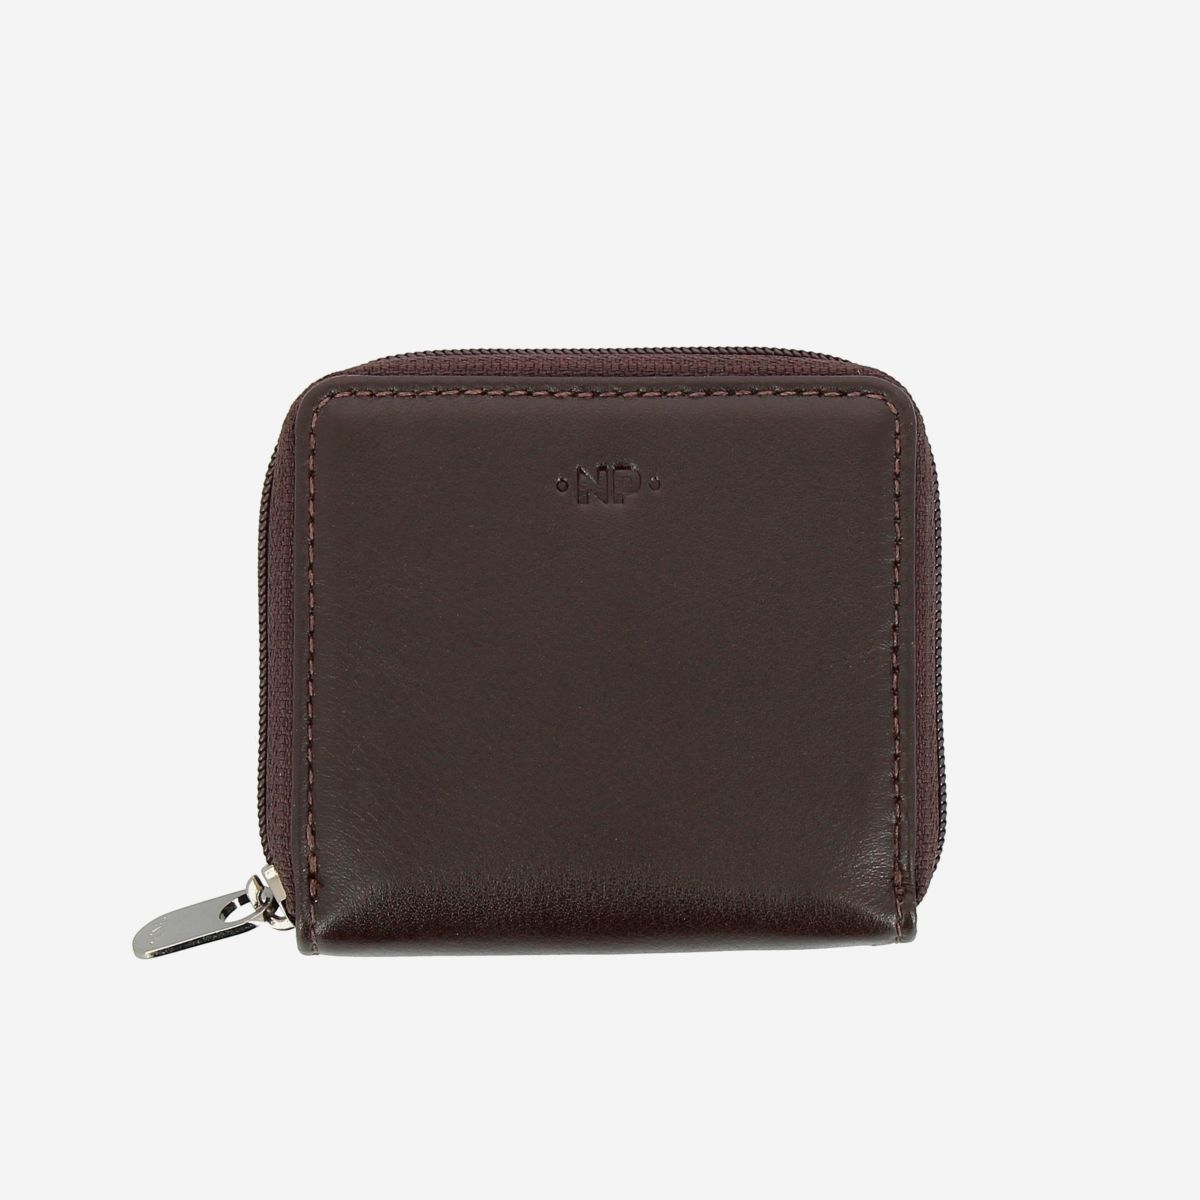 Nuvola Pelle Trifold Mens Leather Wallet Elegant with Coin Pocket Snap Closure and ID Window Dark Brown